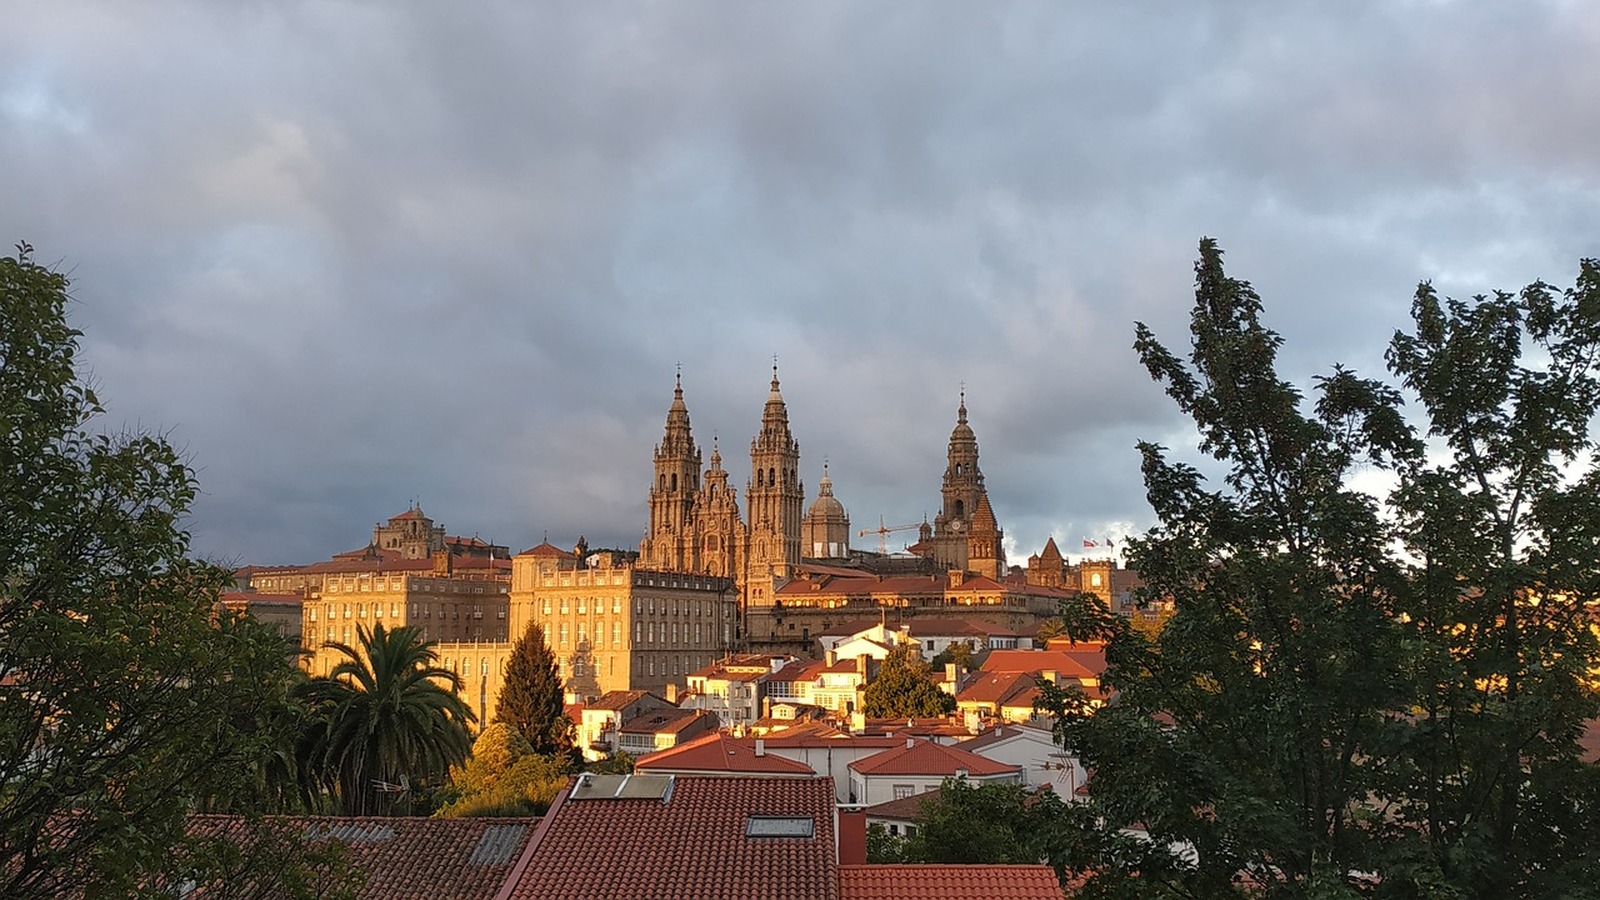 Image of Cathedral View - Santiago de Compostela by Team PhotoHound